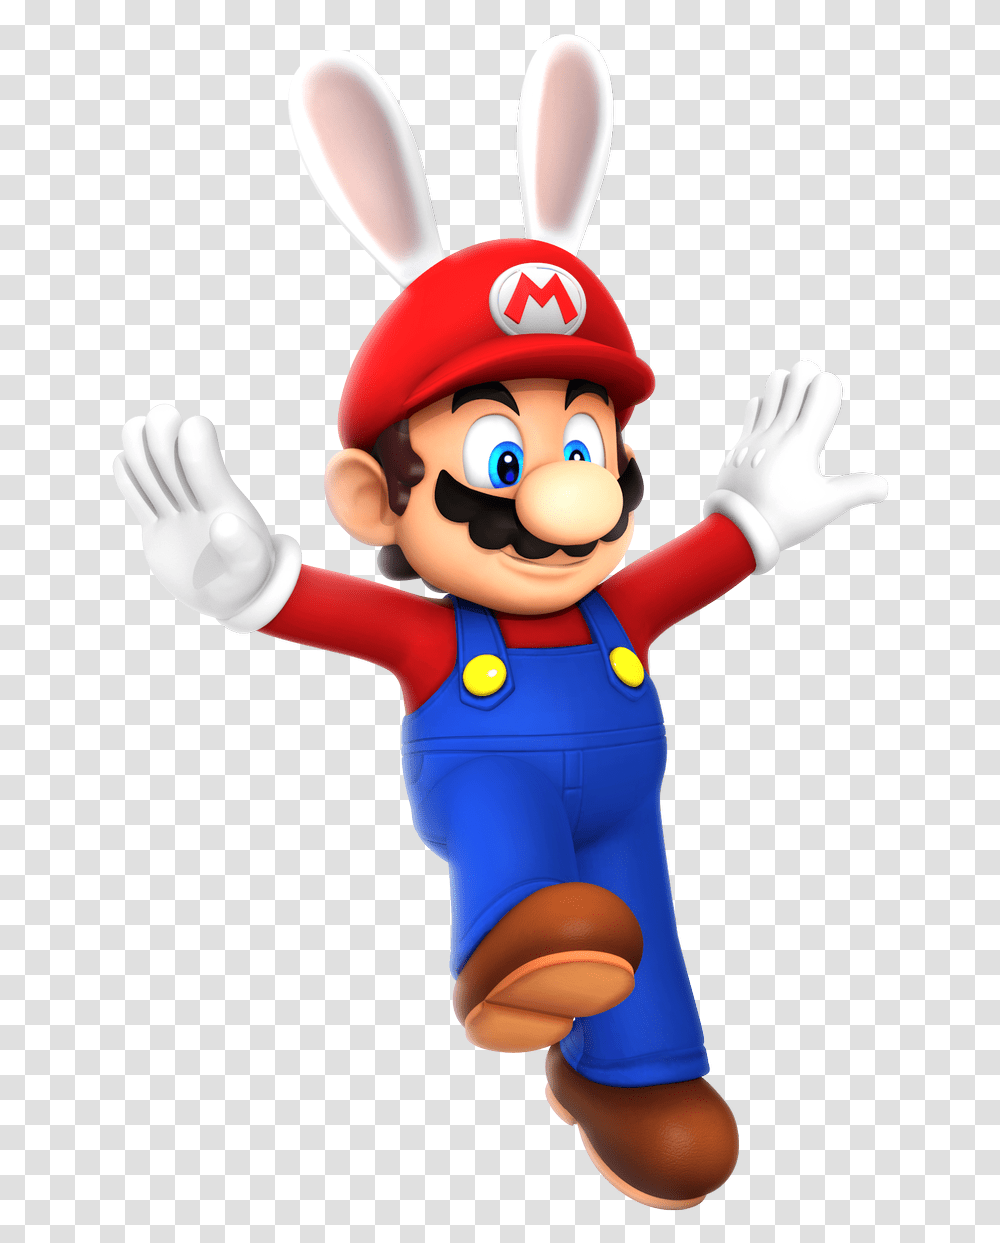 Rock On Twitter Cartoon, Super Mario, Toy Transparent Png